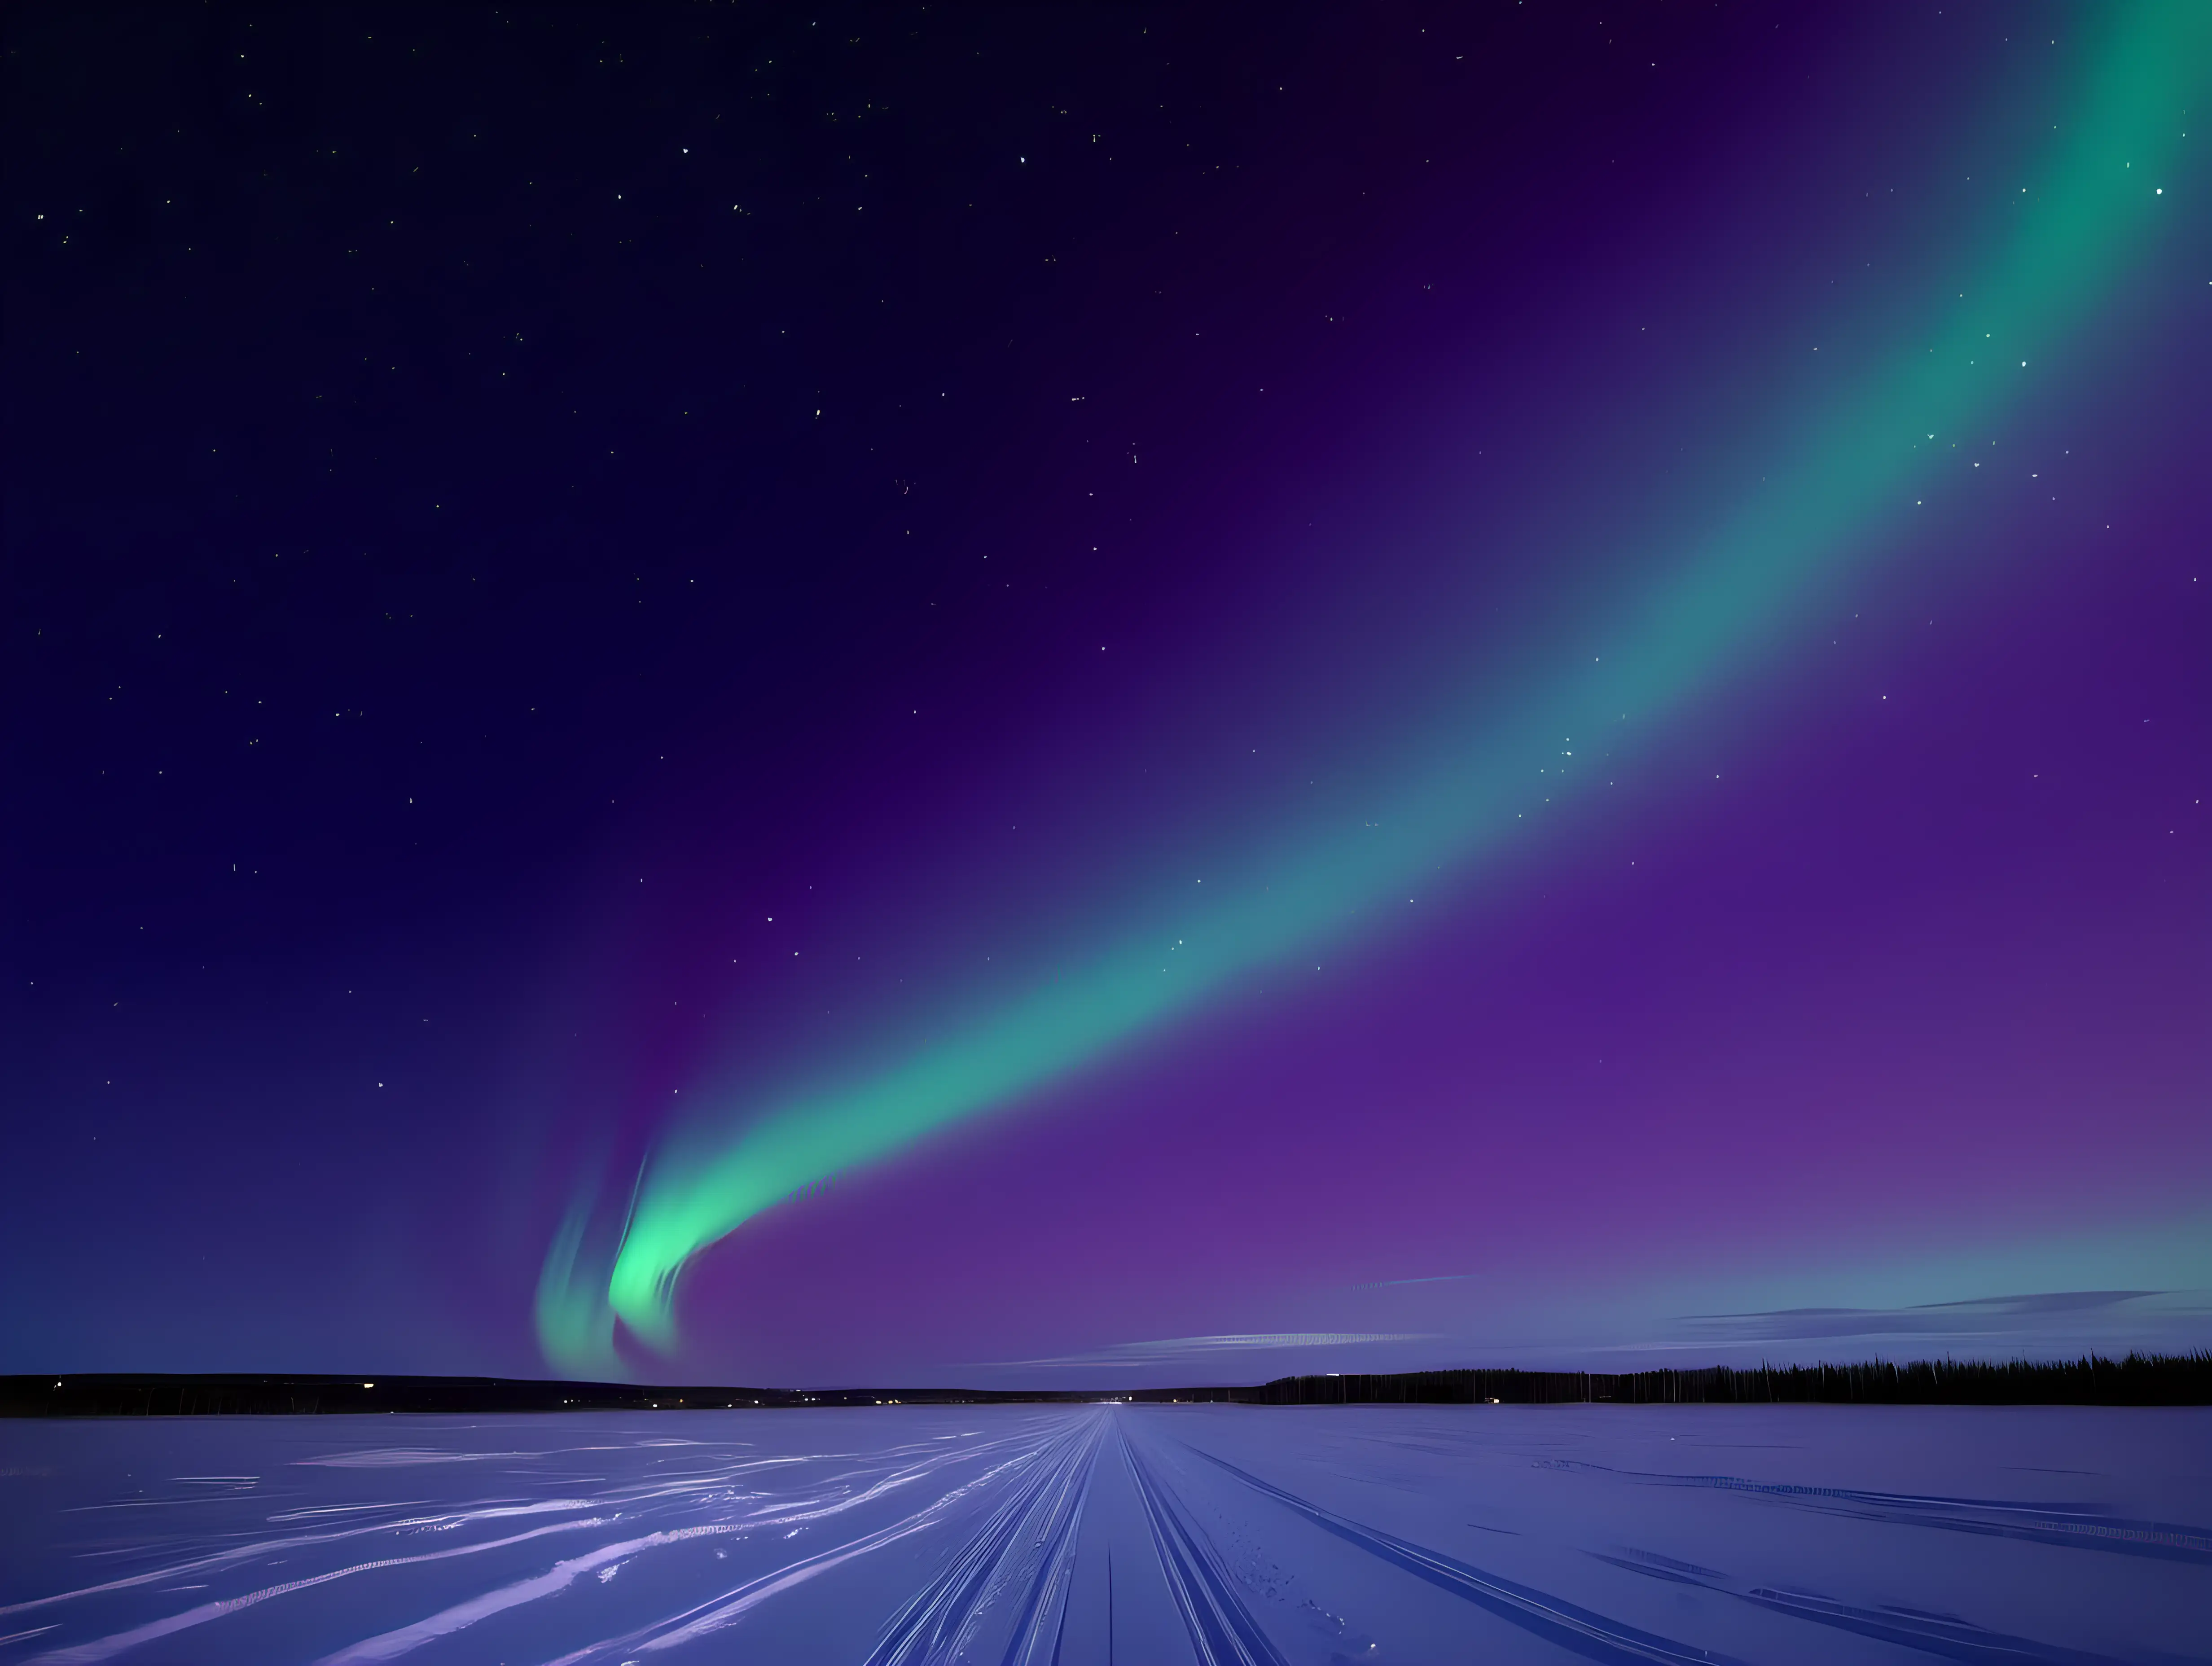 

northern light skies, purples and green only, with a lot of stars, sky only, flat horizon, no ground, no mountains, no snow, no trees, no trees, no mountains, no earth, only sky

